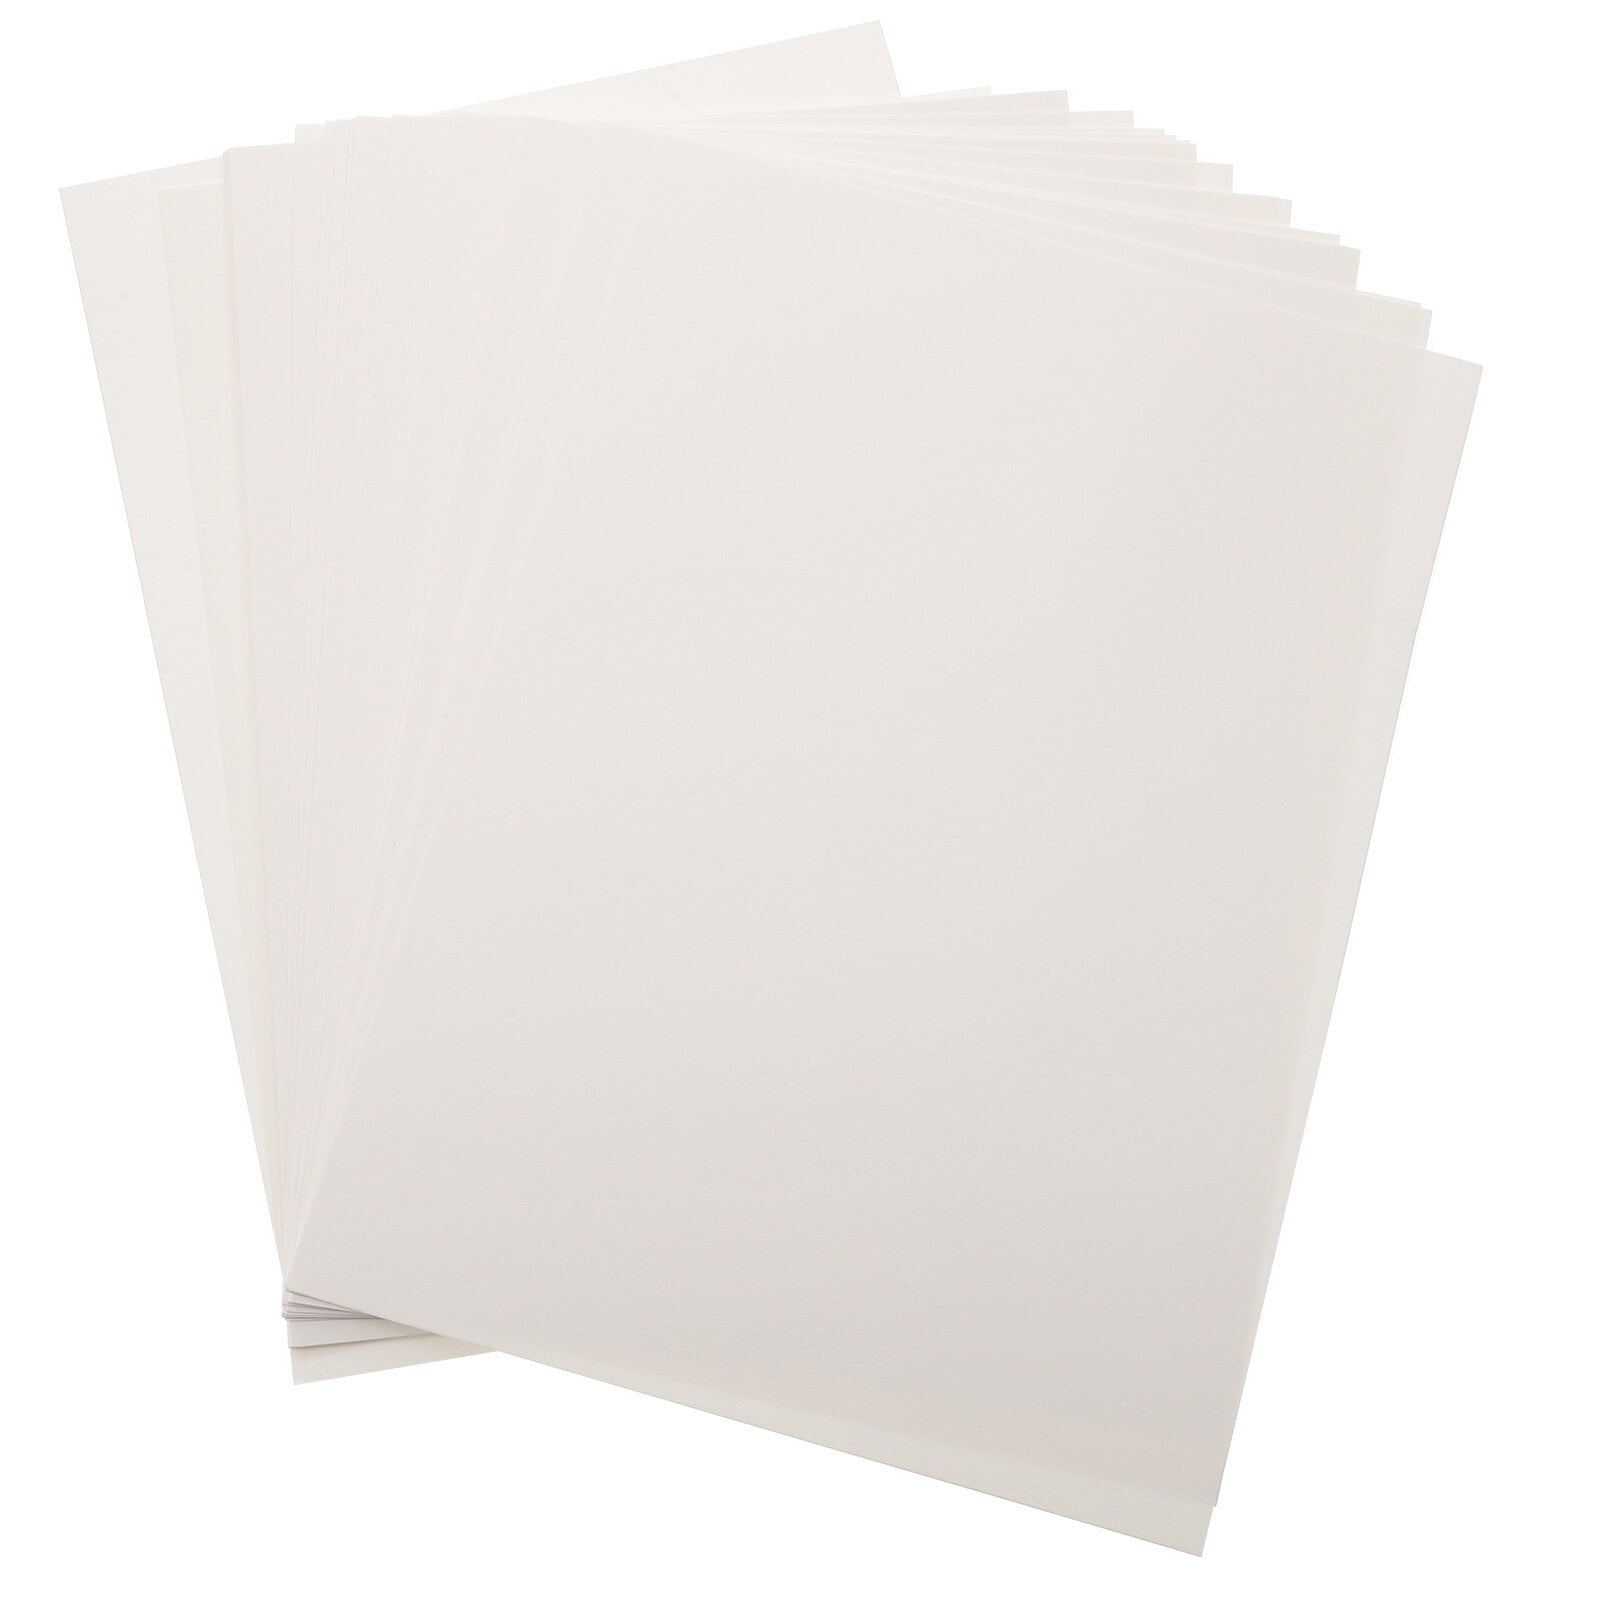 Photography Glossy White Paper 8.3x11.7 A4 Size 20 sheets weight 180gsm.  Dries Quickly best finish colors and Look Pictures print for all inkjet